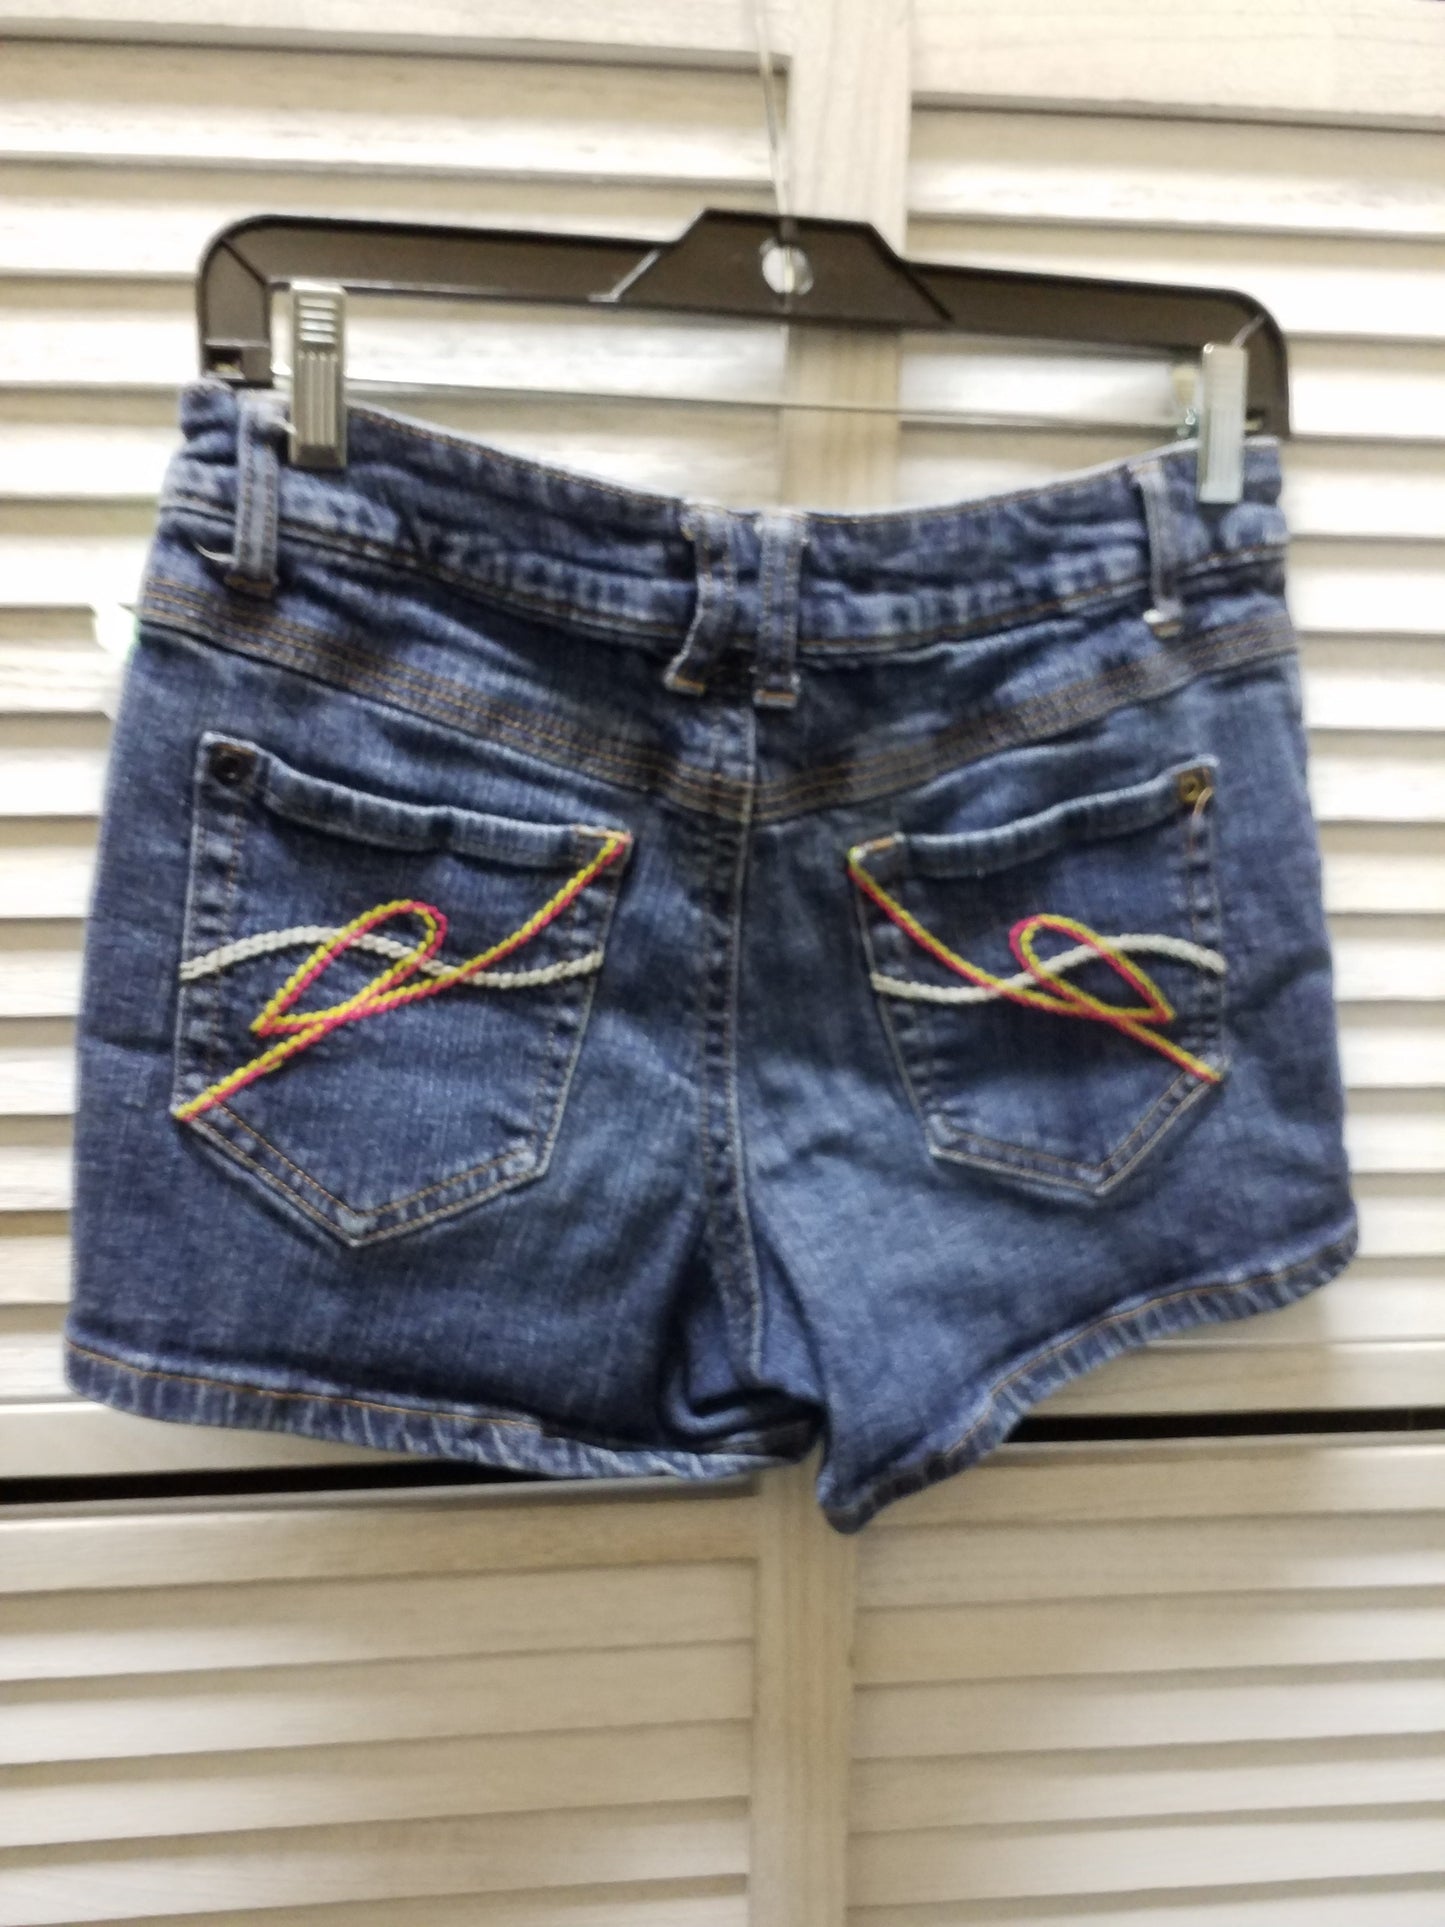 Shorts By Cato  Size: 8